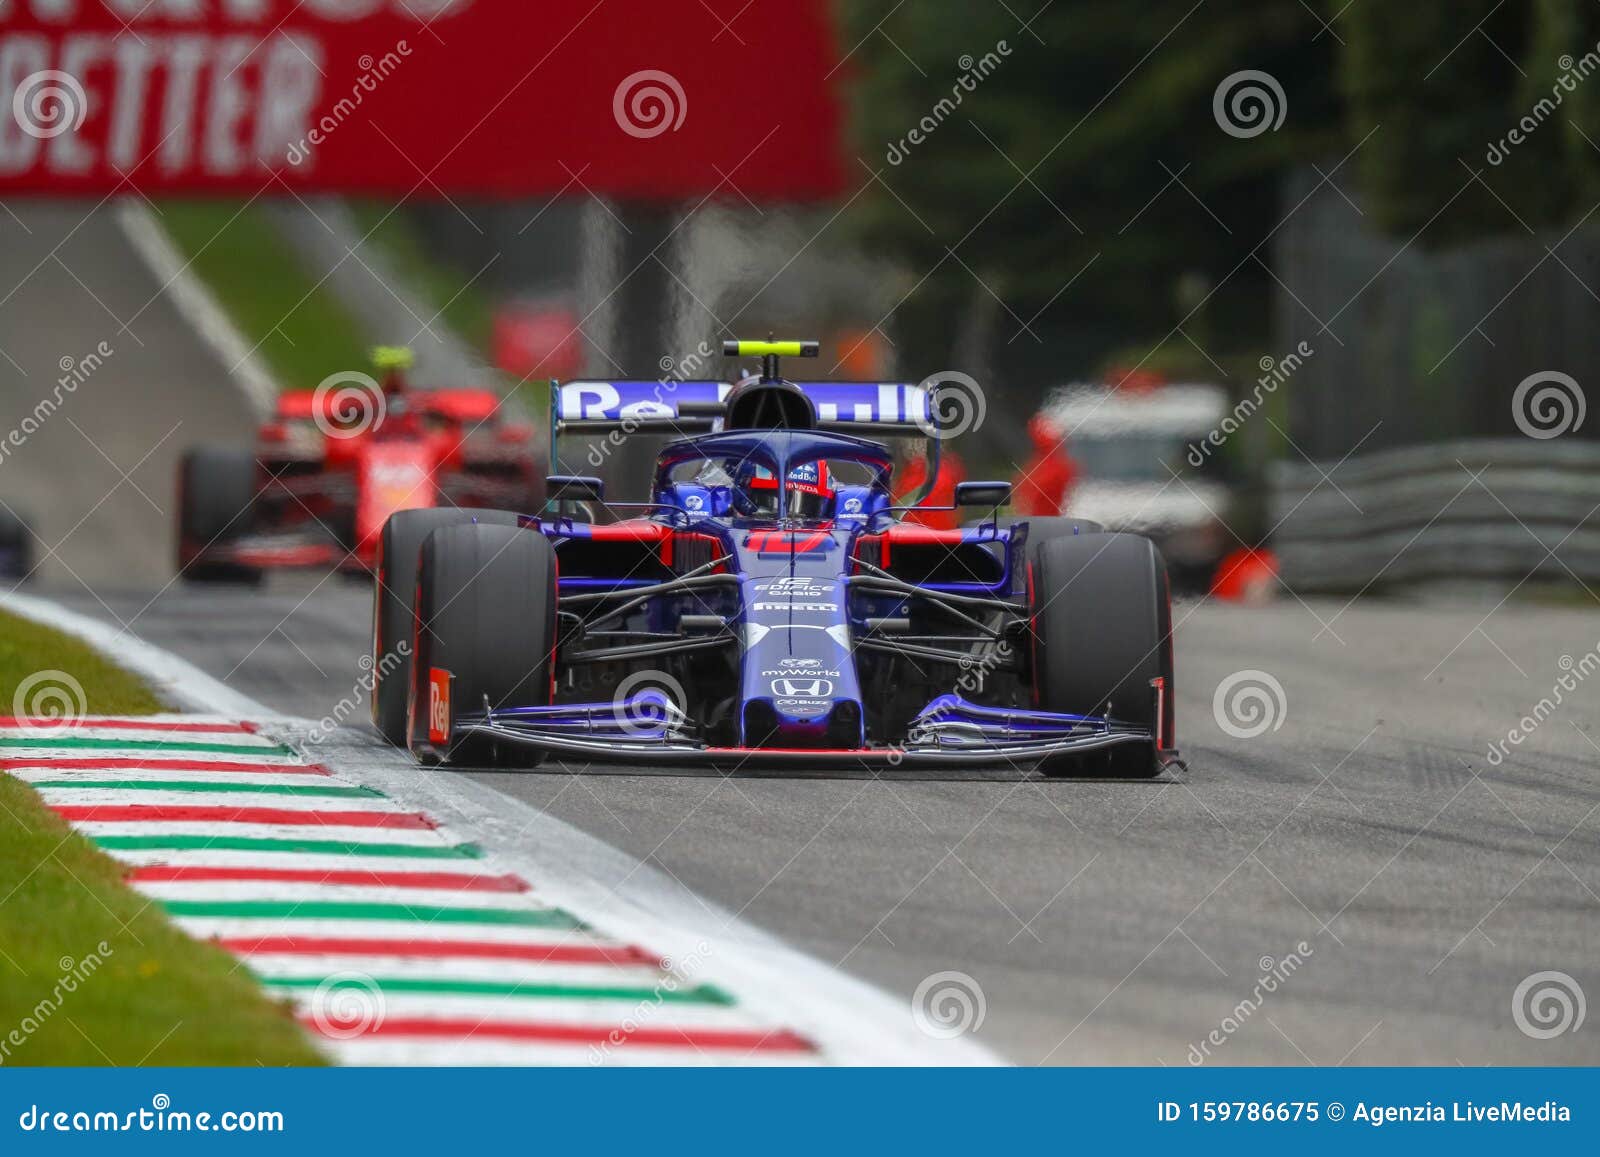 Formula 1 Championship Grand Prix Heineken of Italy 2019 - Friday - Free Practice 1 and 2 Editorial Image